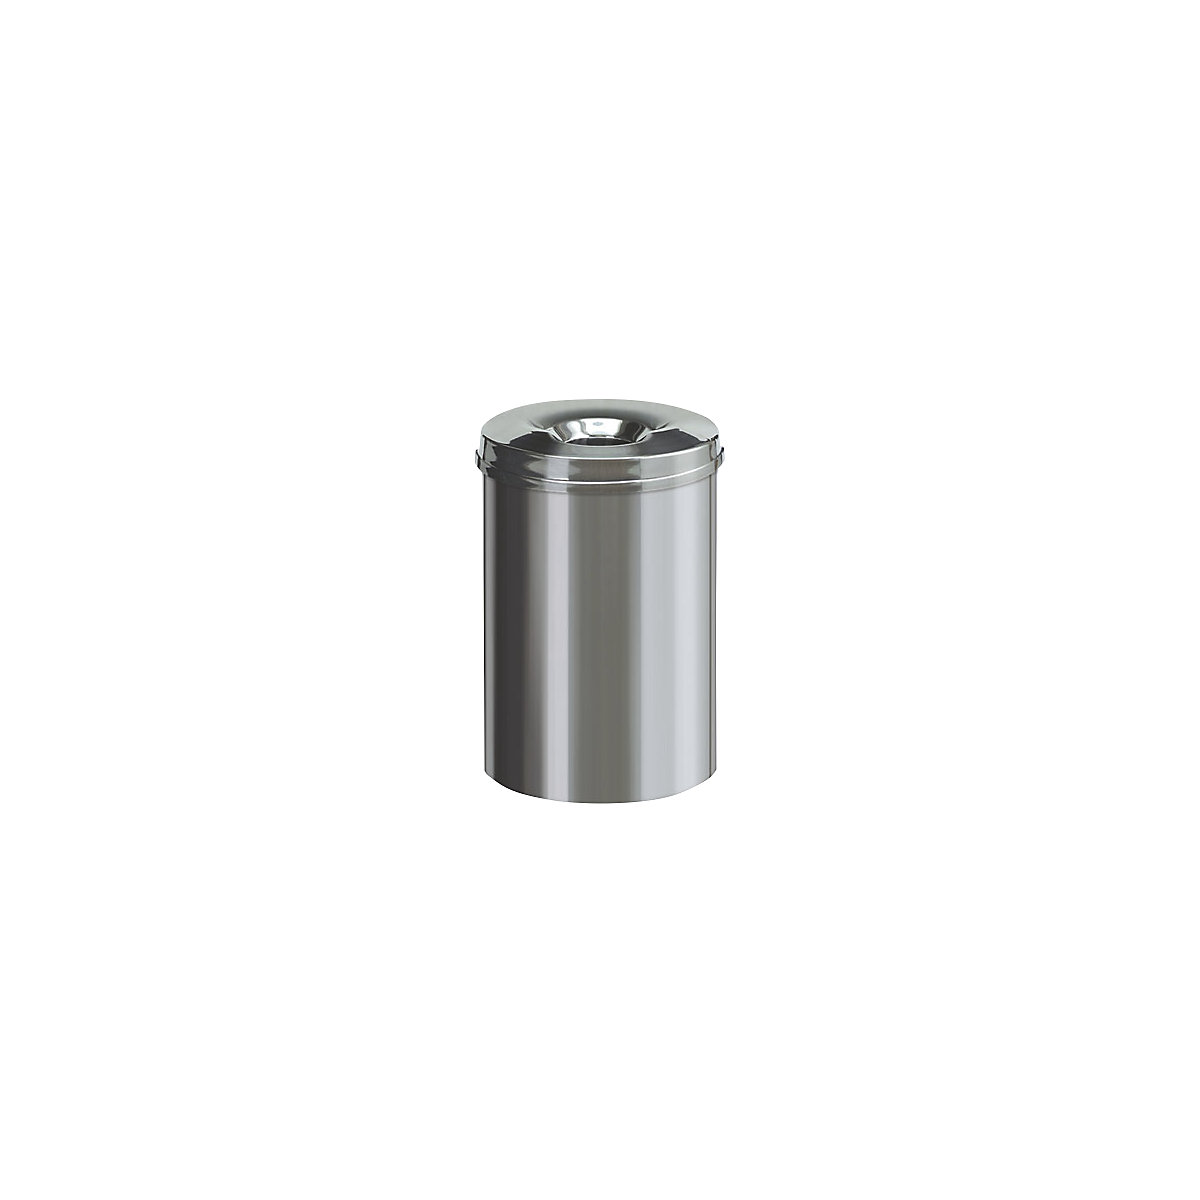 Safety waste collector, stainless steel